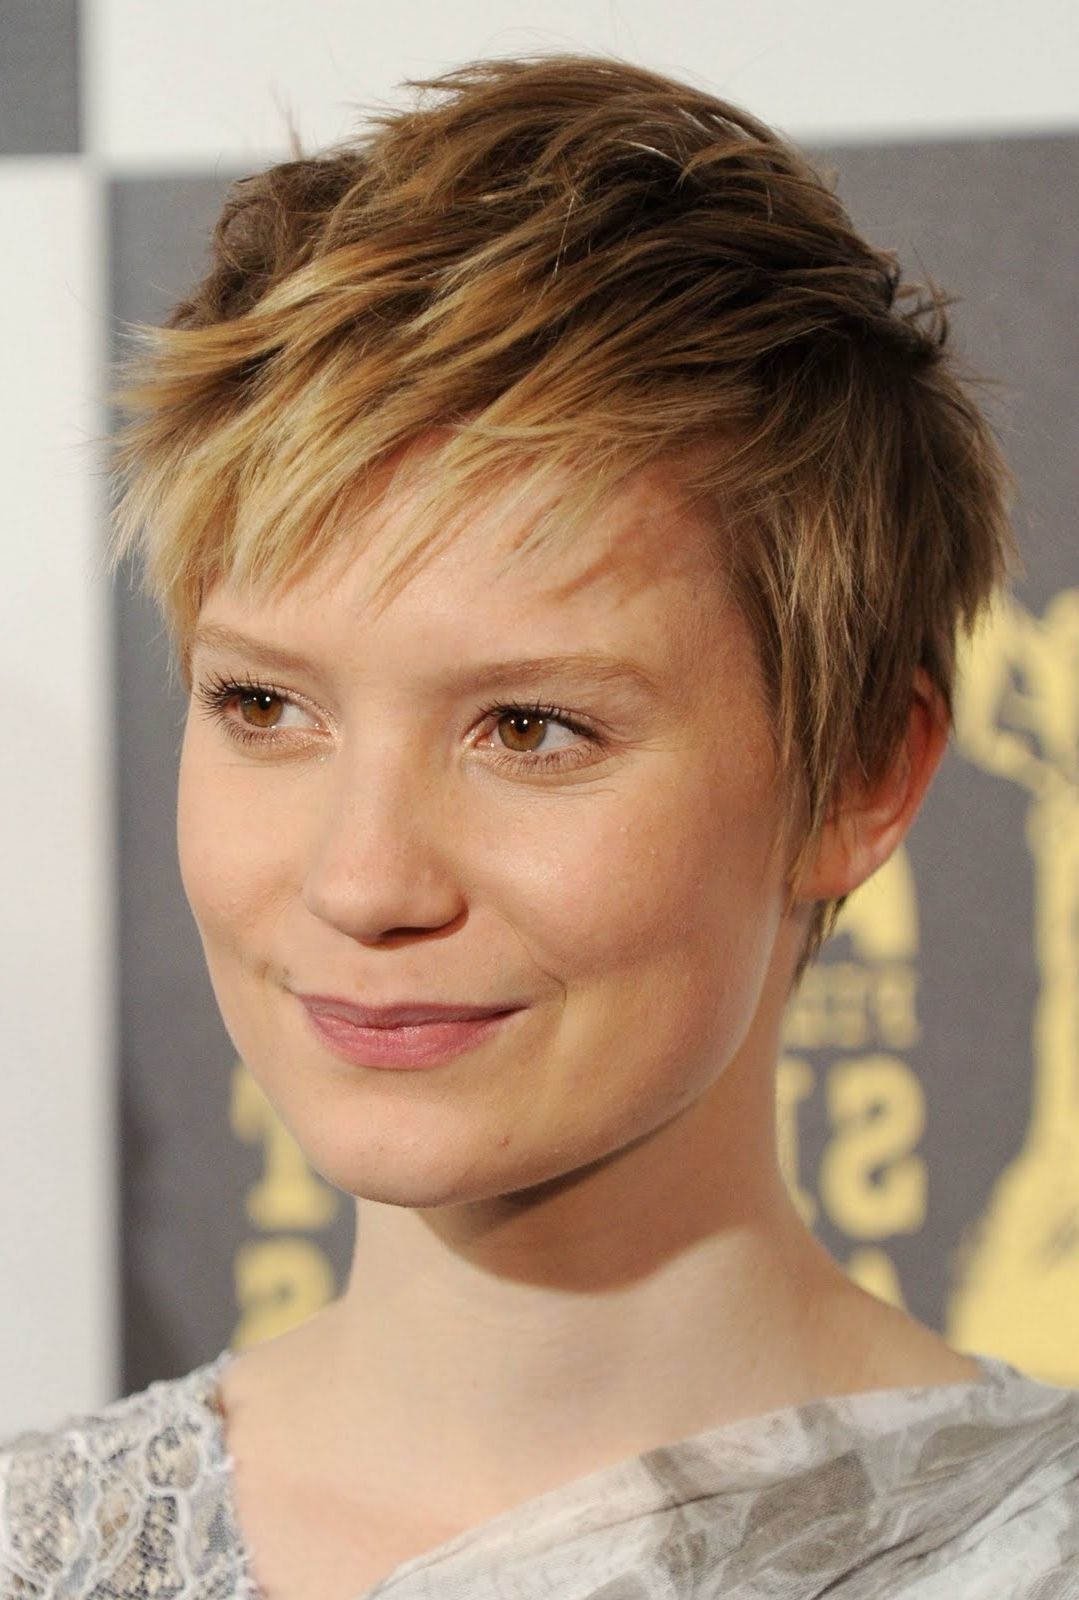 Long Straight Haircuts: Short Pixie Haircuts Are Very Stylish Within Most Current Short Straight Pixie Hairstyles (View 5 of 15)